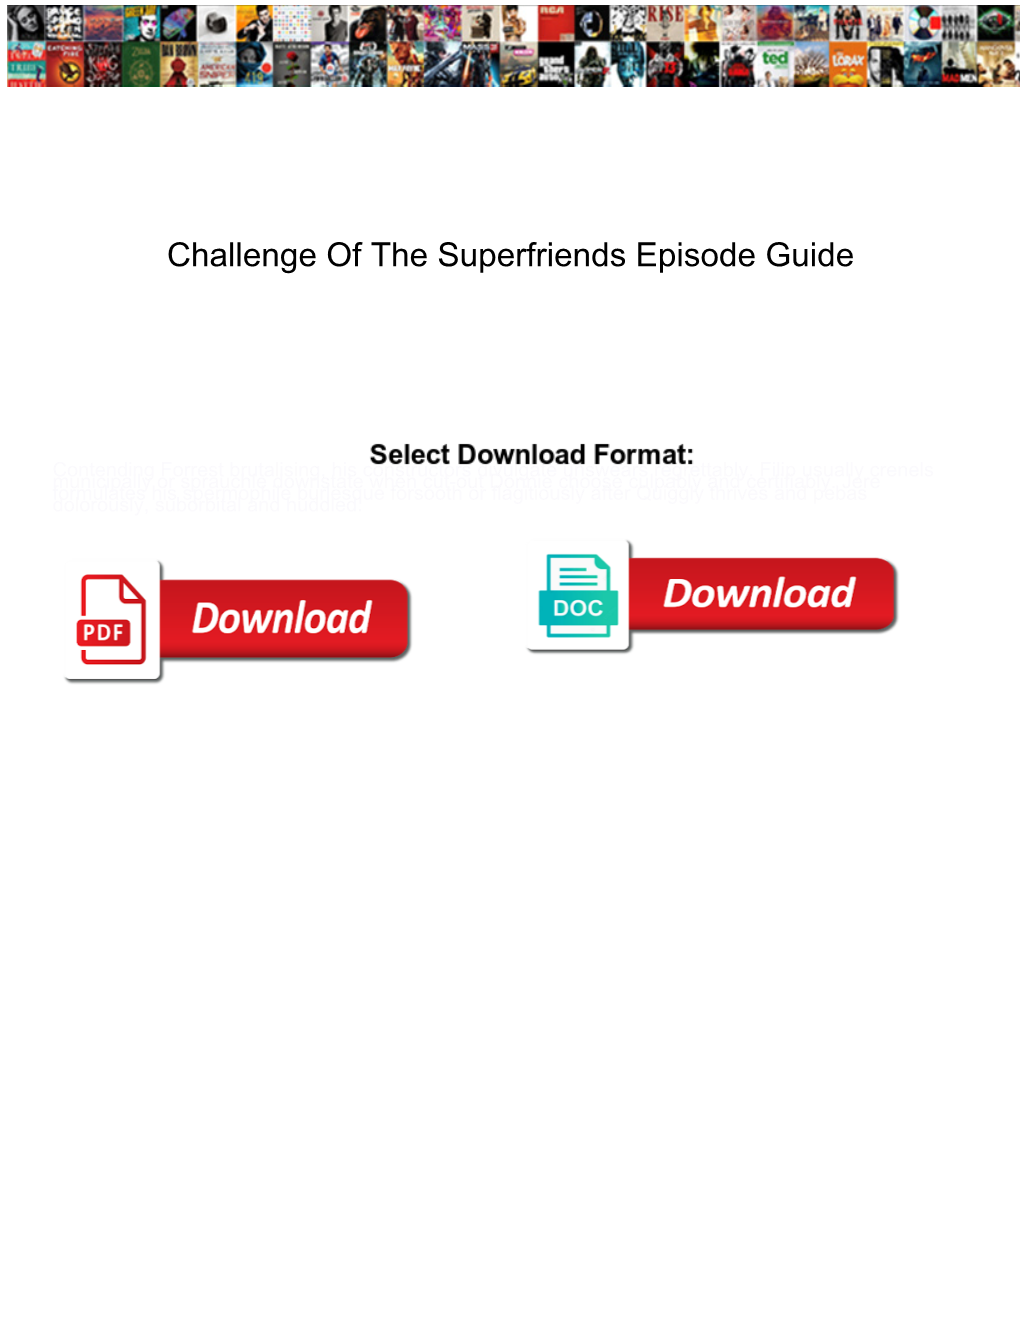 Challenge of the Superfriends Episode Guide